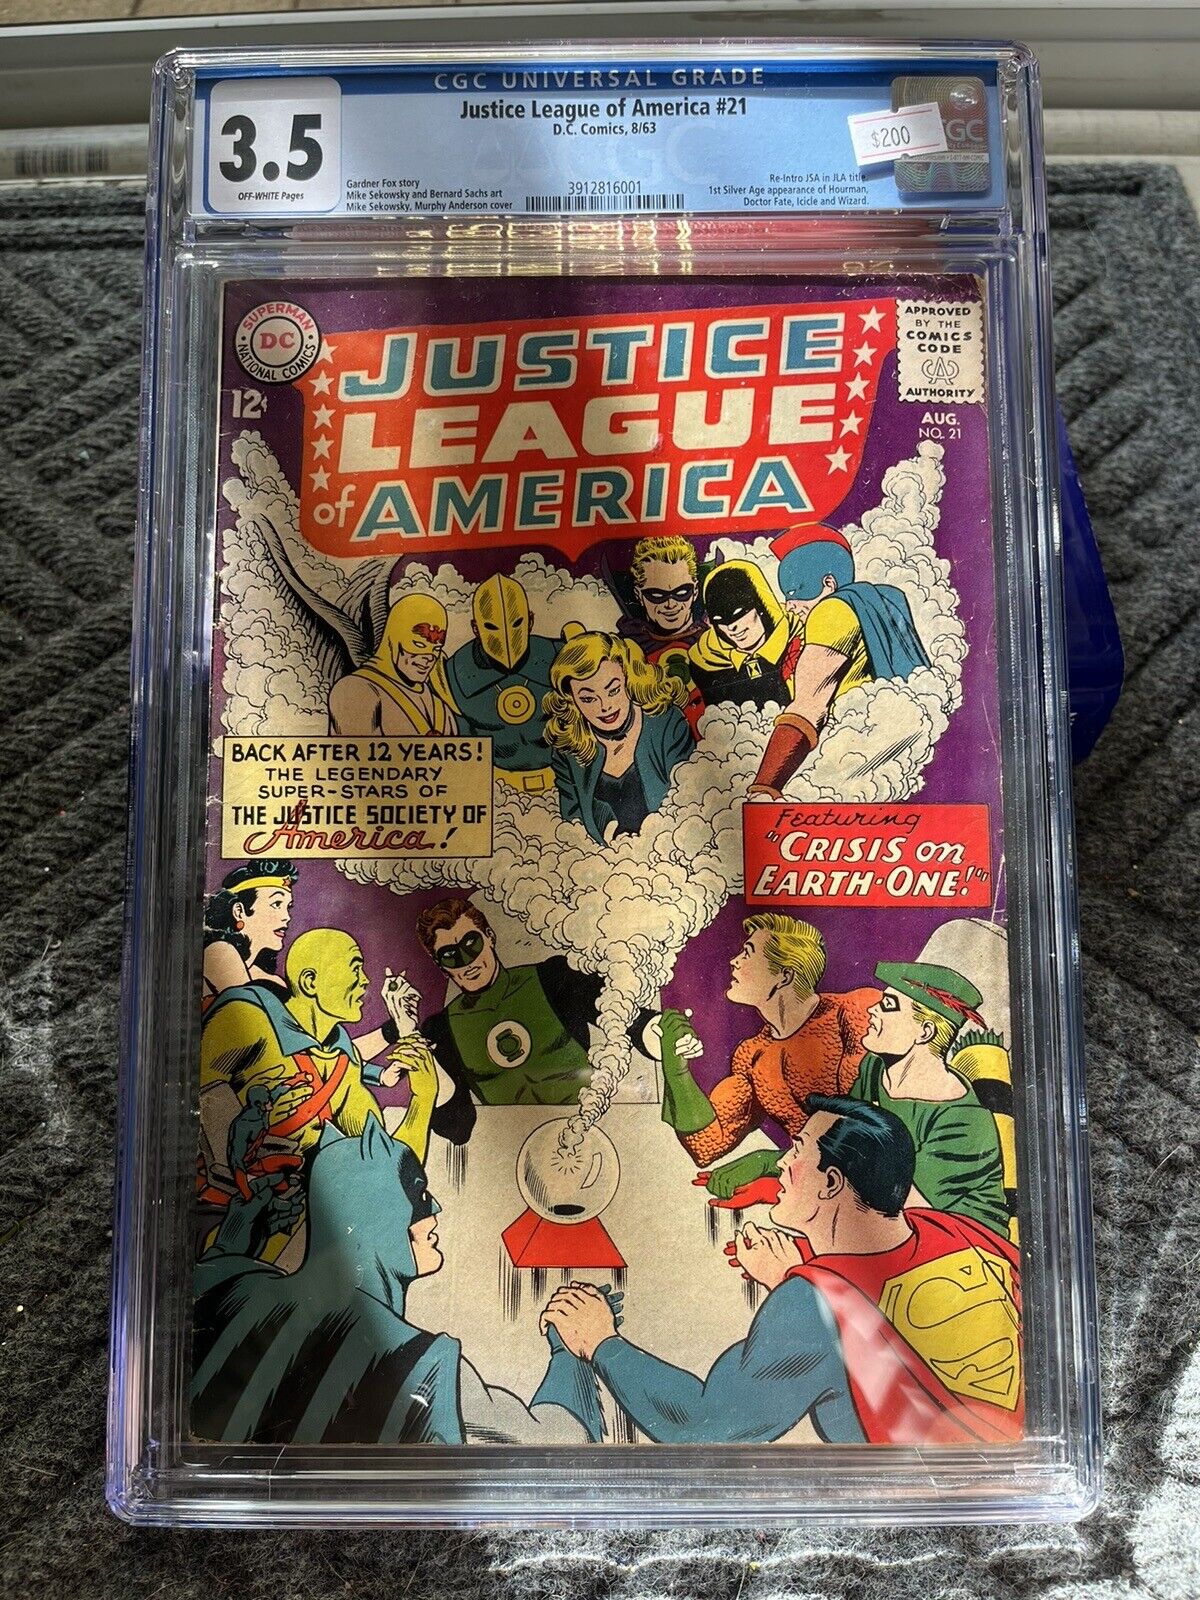 Justice League of America #21 (1963) CGC 3.5 - 1st Silver Age Justice Society